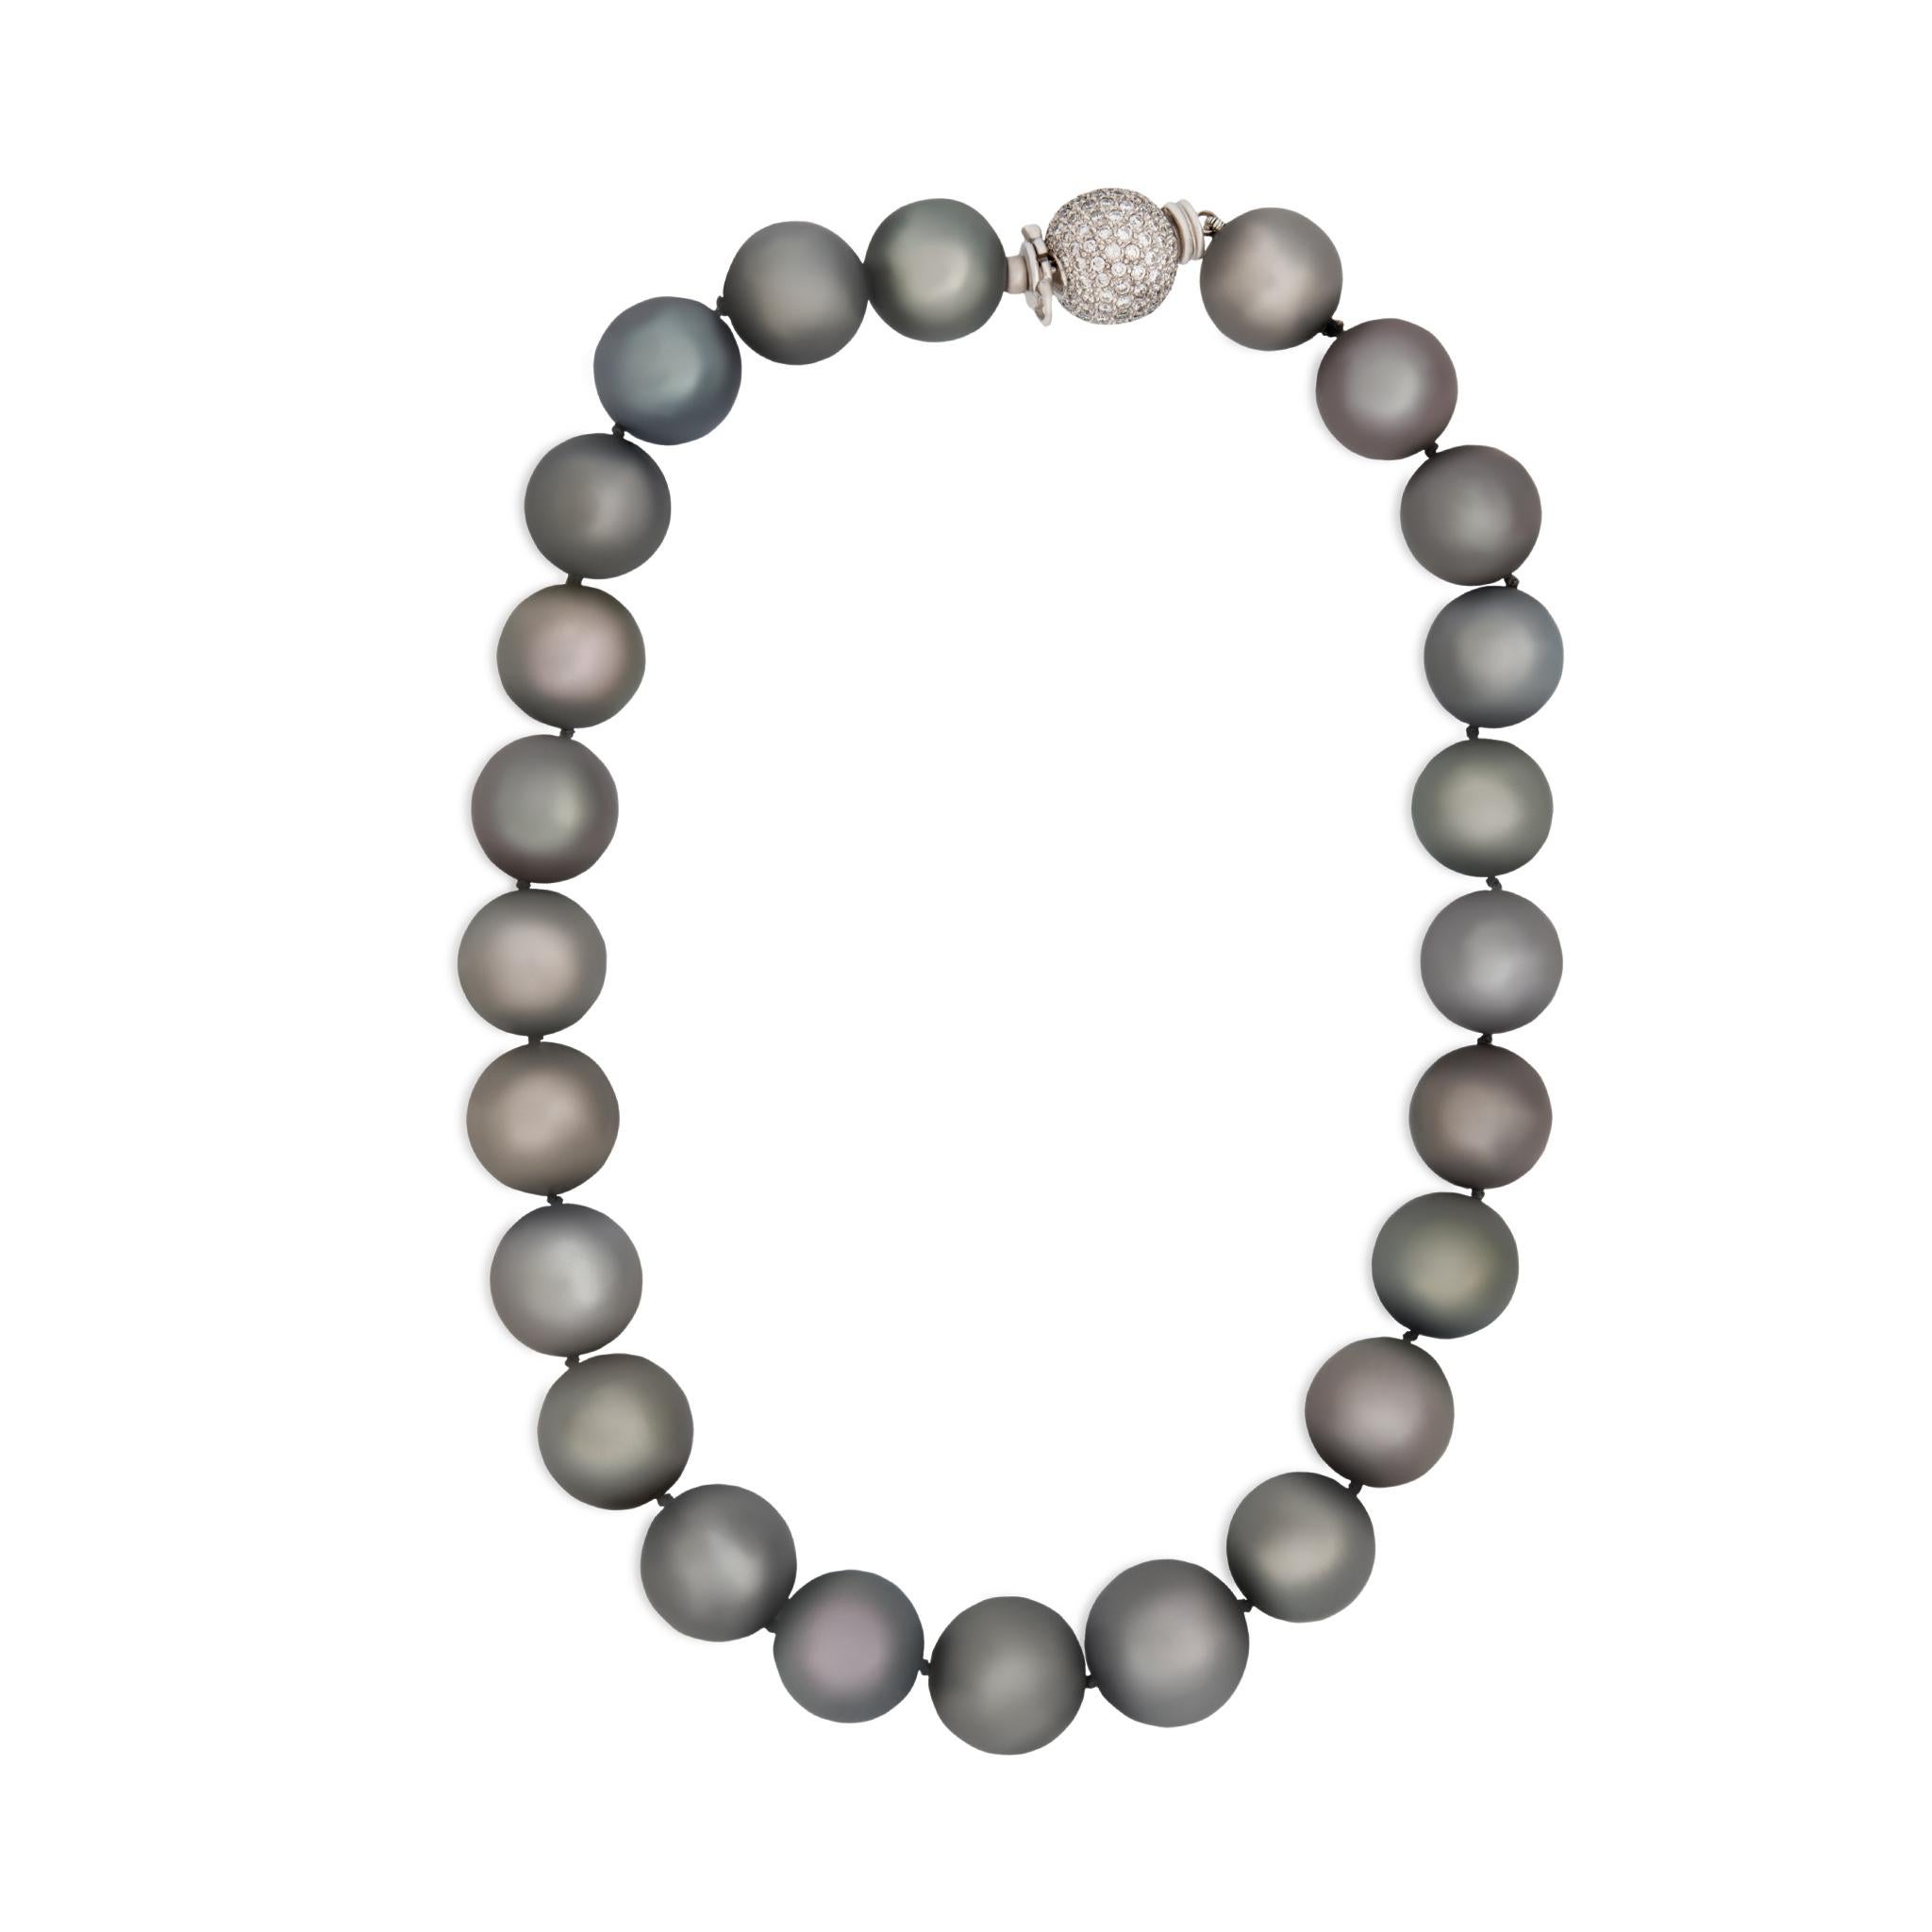 METAL TYPE: 18K White Gold
STONE WEIGHT:15-17mm South Sea Pearls
TOTAL WEIGHT: 136.5g
NECKLACE LENGTH: 16